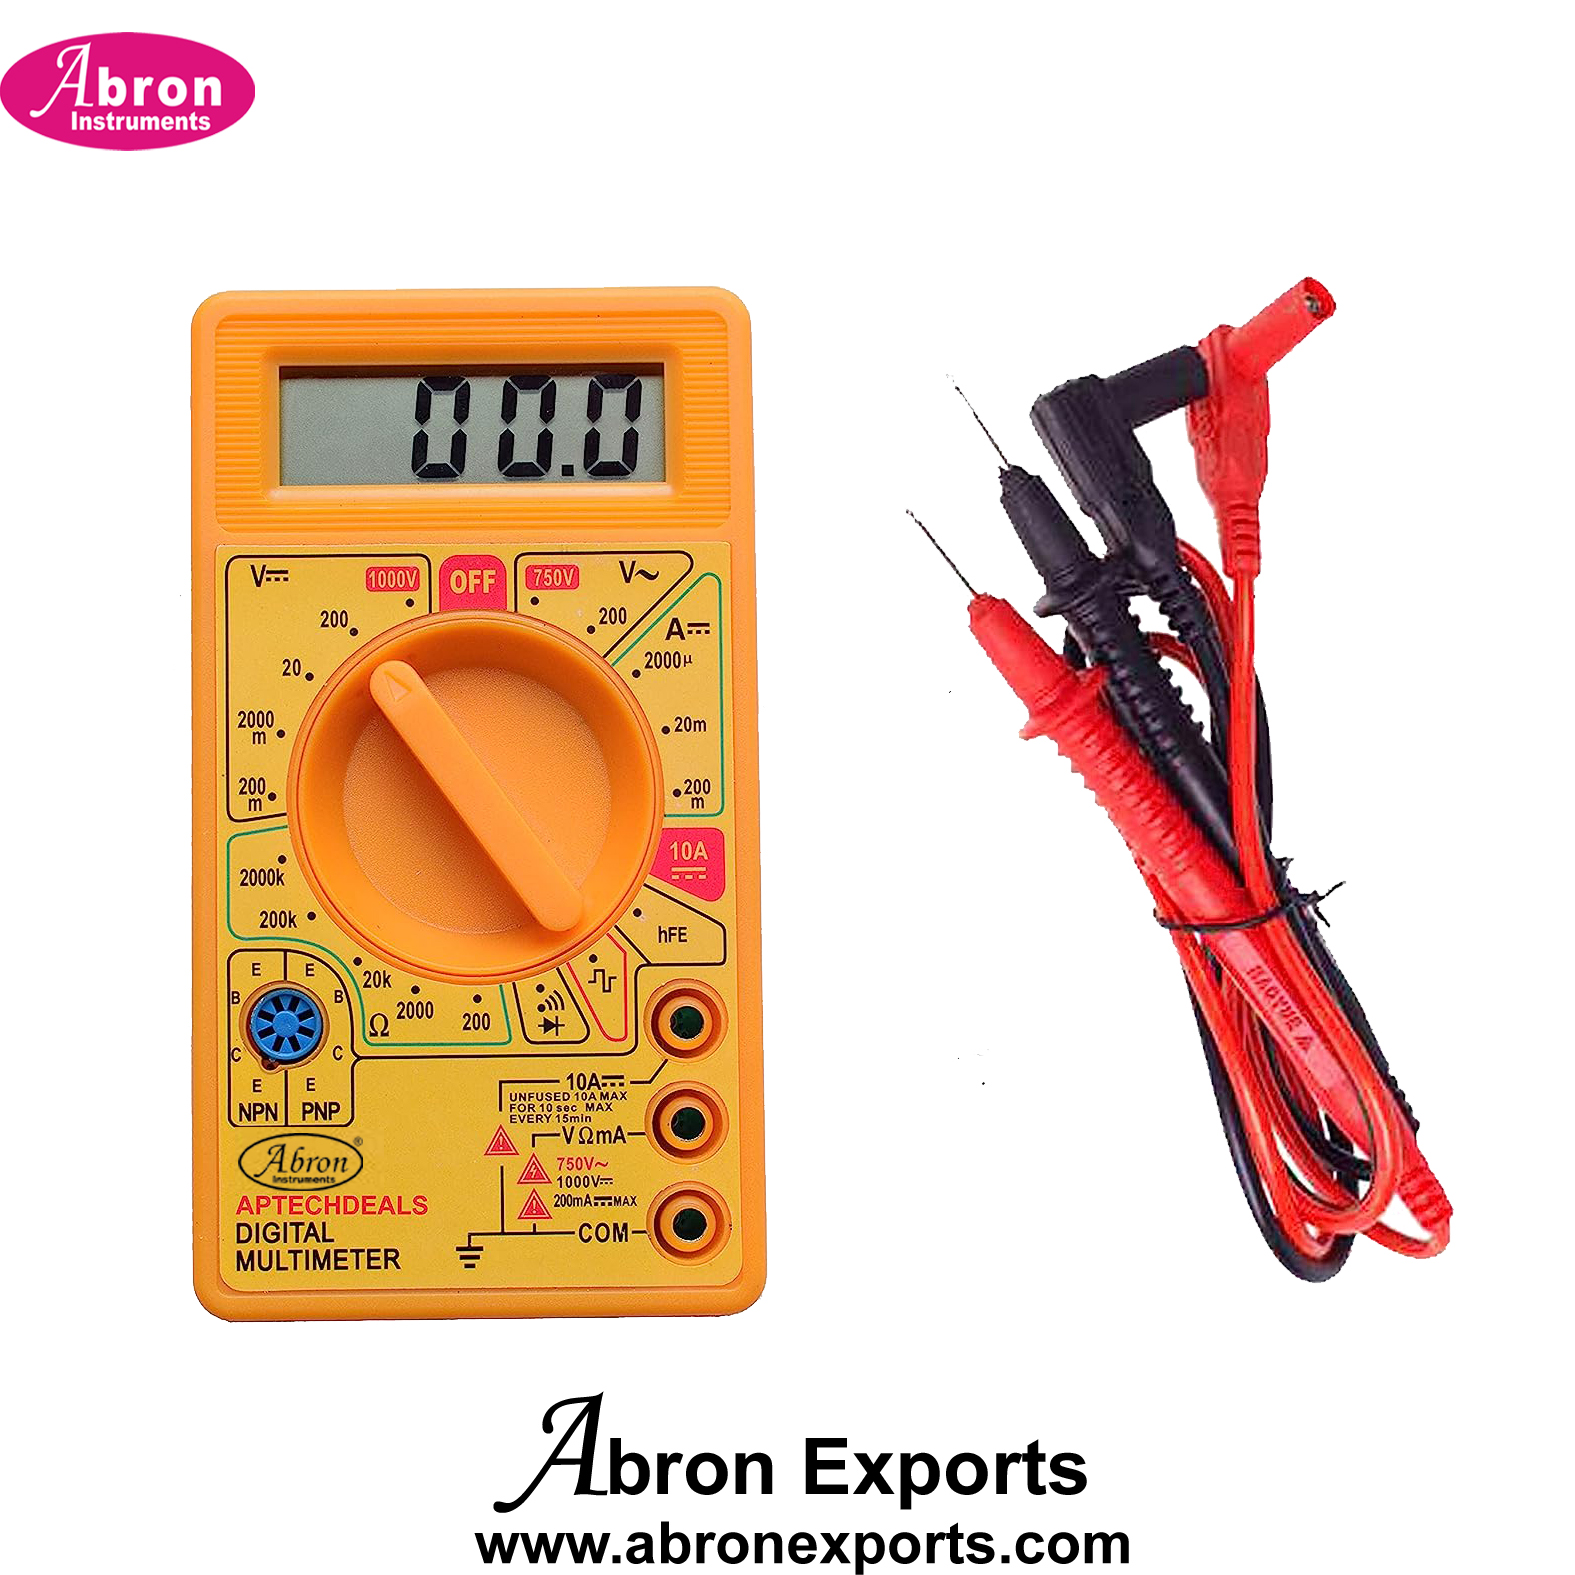 Multimeter Digital LCD AC750W DC 200mV-200VDC Voltmeter 2000uA-200mAmmeter 200R - 2000K Ohms Resistance NPN PNP Beep Continue Check With Pair Wire Probes Abron 10pc AE-1313AB1 